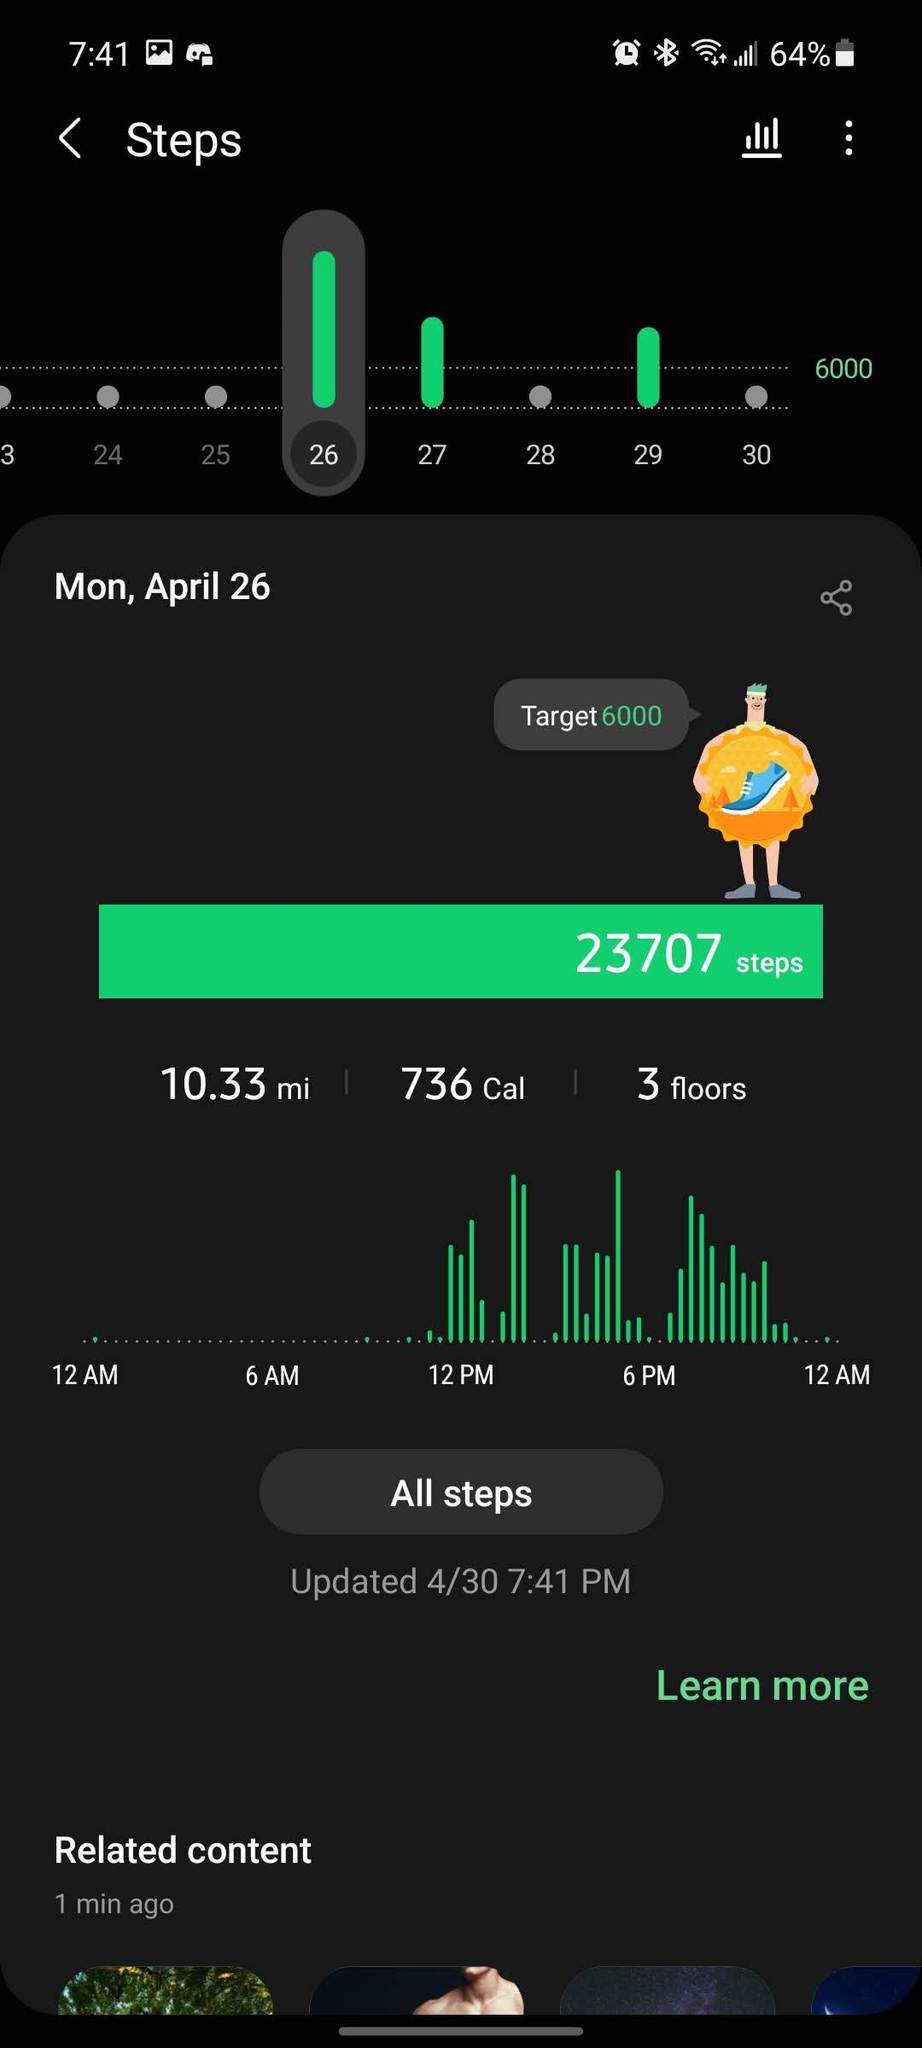 Samsung Health App gamification of fitness